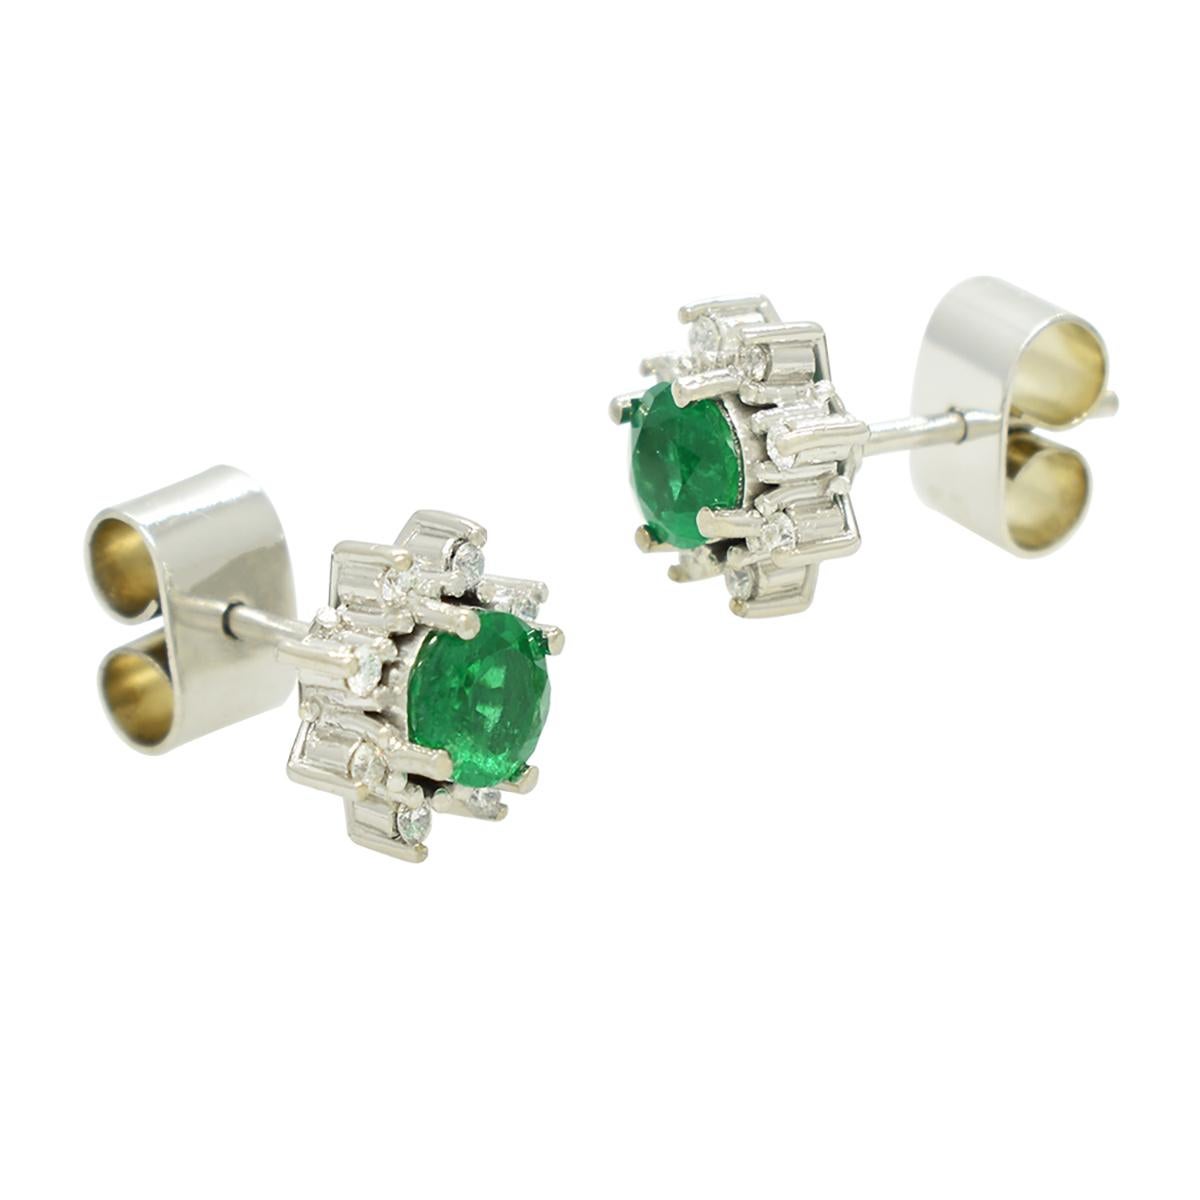 Emerald and diamond stud earrings with an exquisite selection of gemstones; 2 gorgeous round cut natural emeralds from Colombia with dark and vivid green color full of life in 0.73 carats total weight, and 16 round cut diamonds in 0.16 carats total